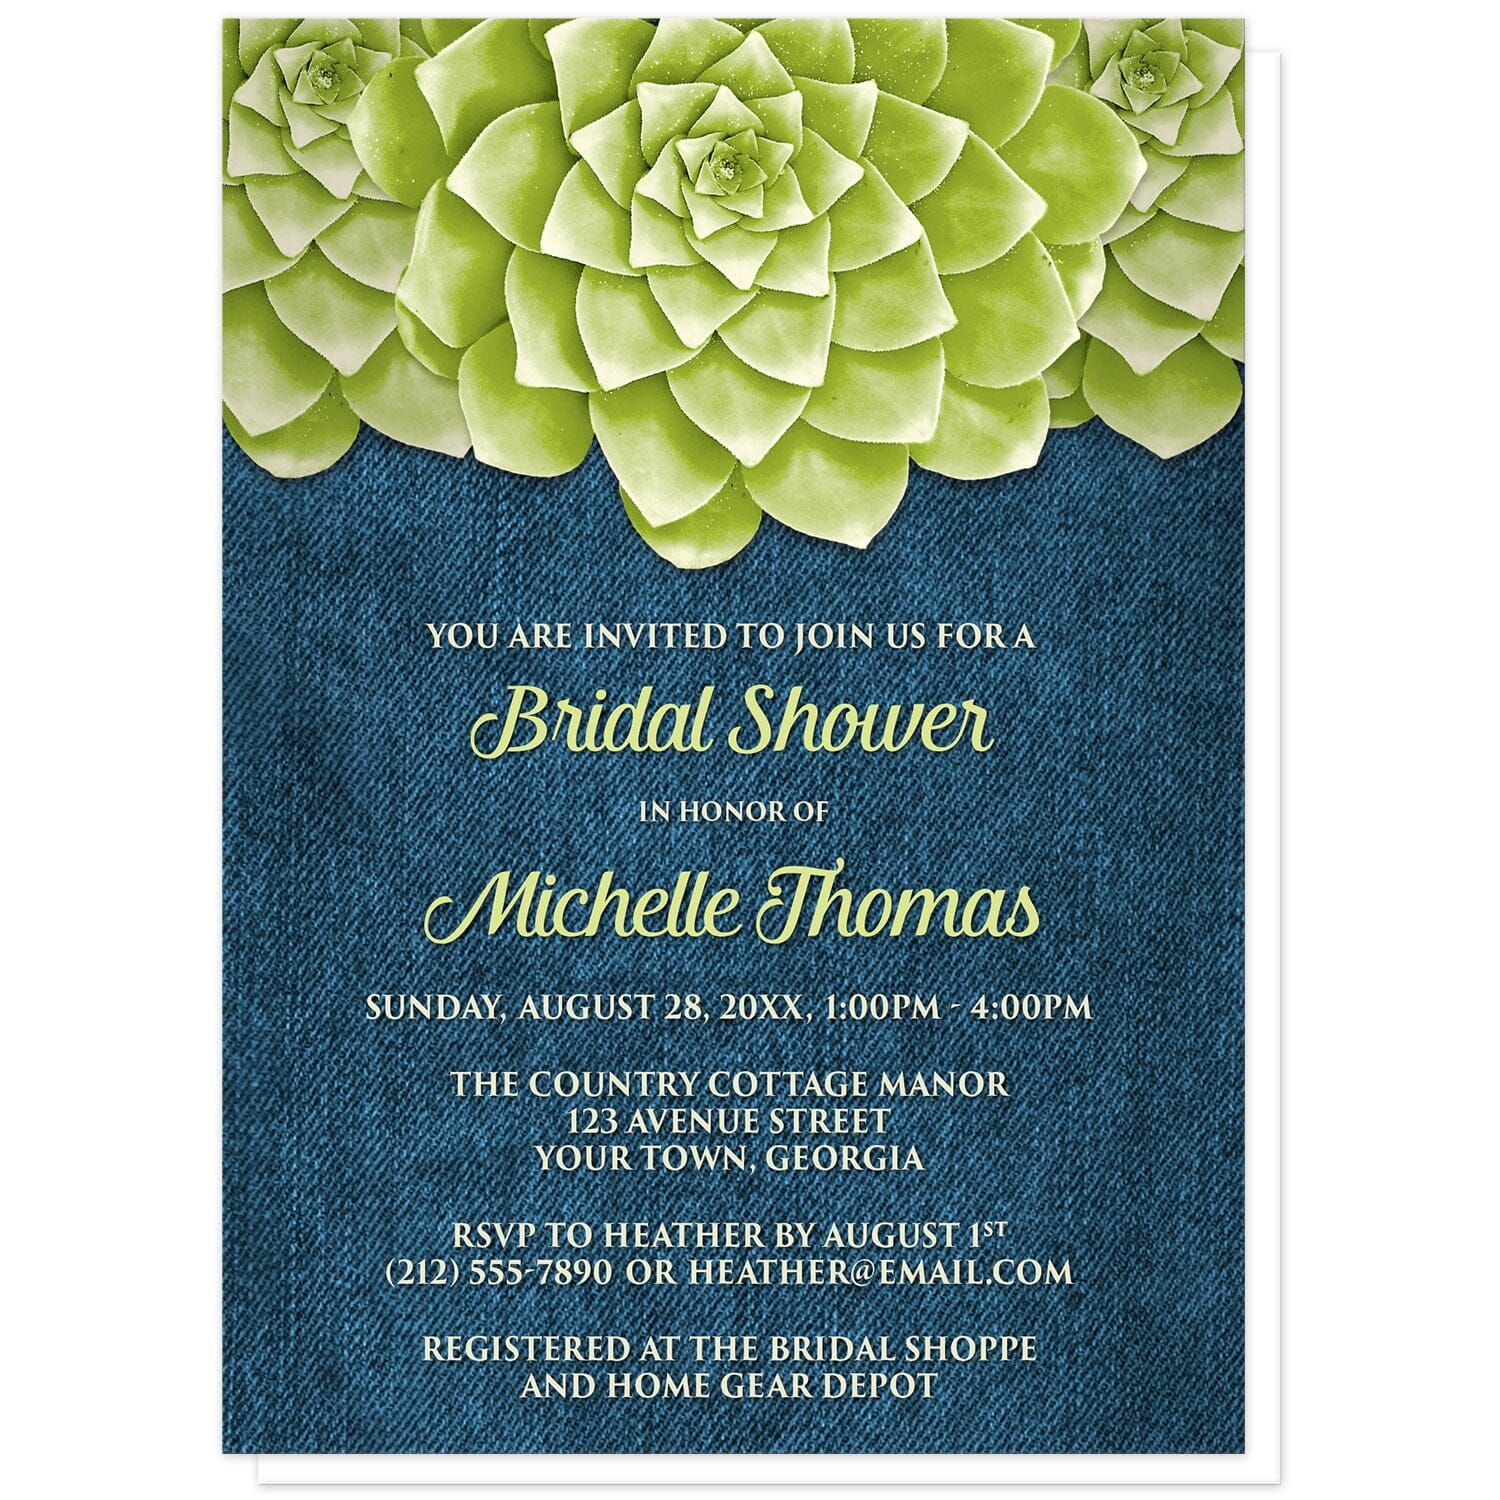 Succulent Green Blue Denim Bridal Shower Invitations at Artistically Invited. Cool and fresh succulent green blue denim bridal shower invitations with three large green succulents along the top of the invitations over a rustic blue denim background design. Your personalized bridal shower celebration details are custom printed in green and light green over the denim background below the succulents. 